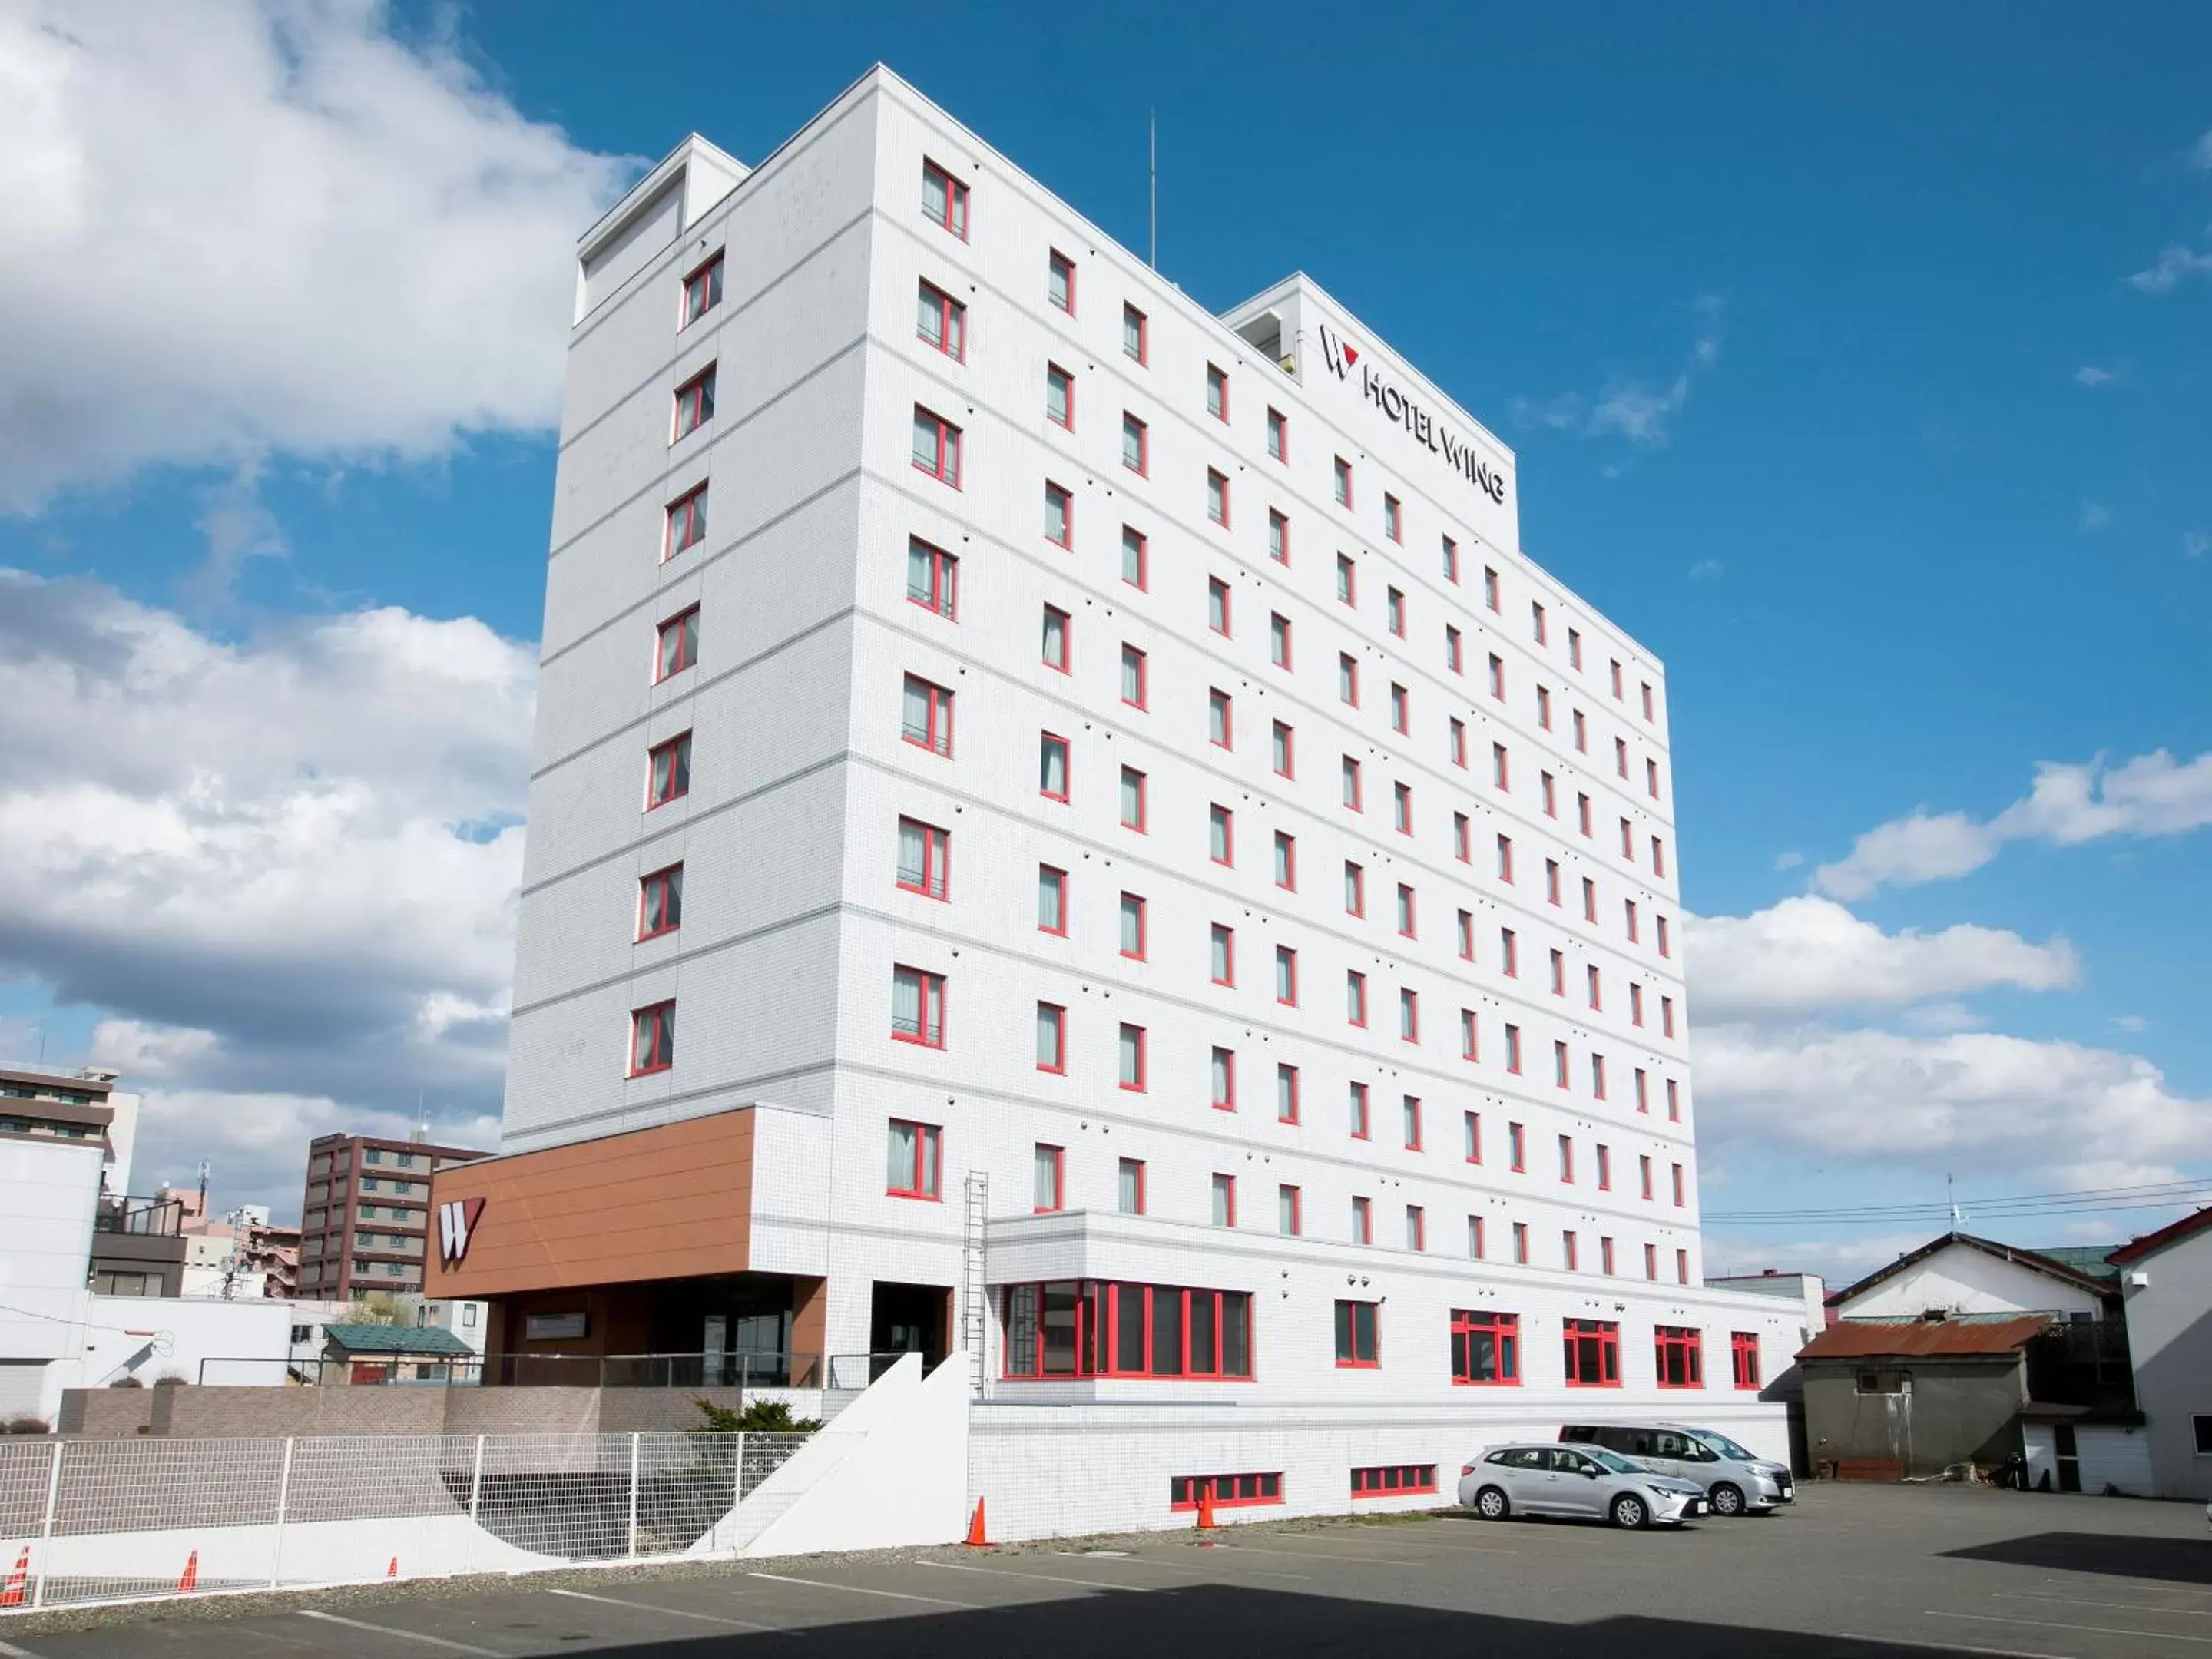 Property building in Hotel Wing International Chitose